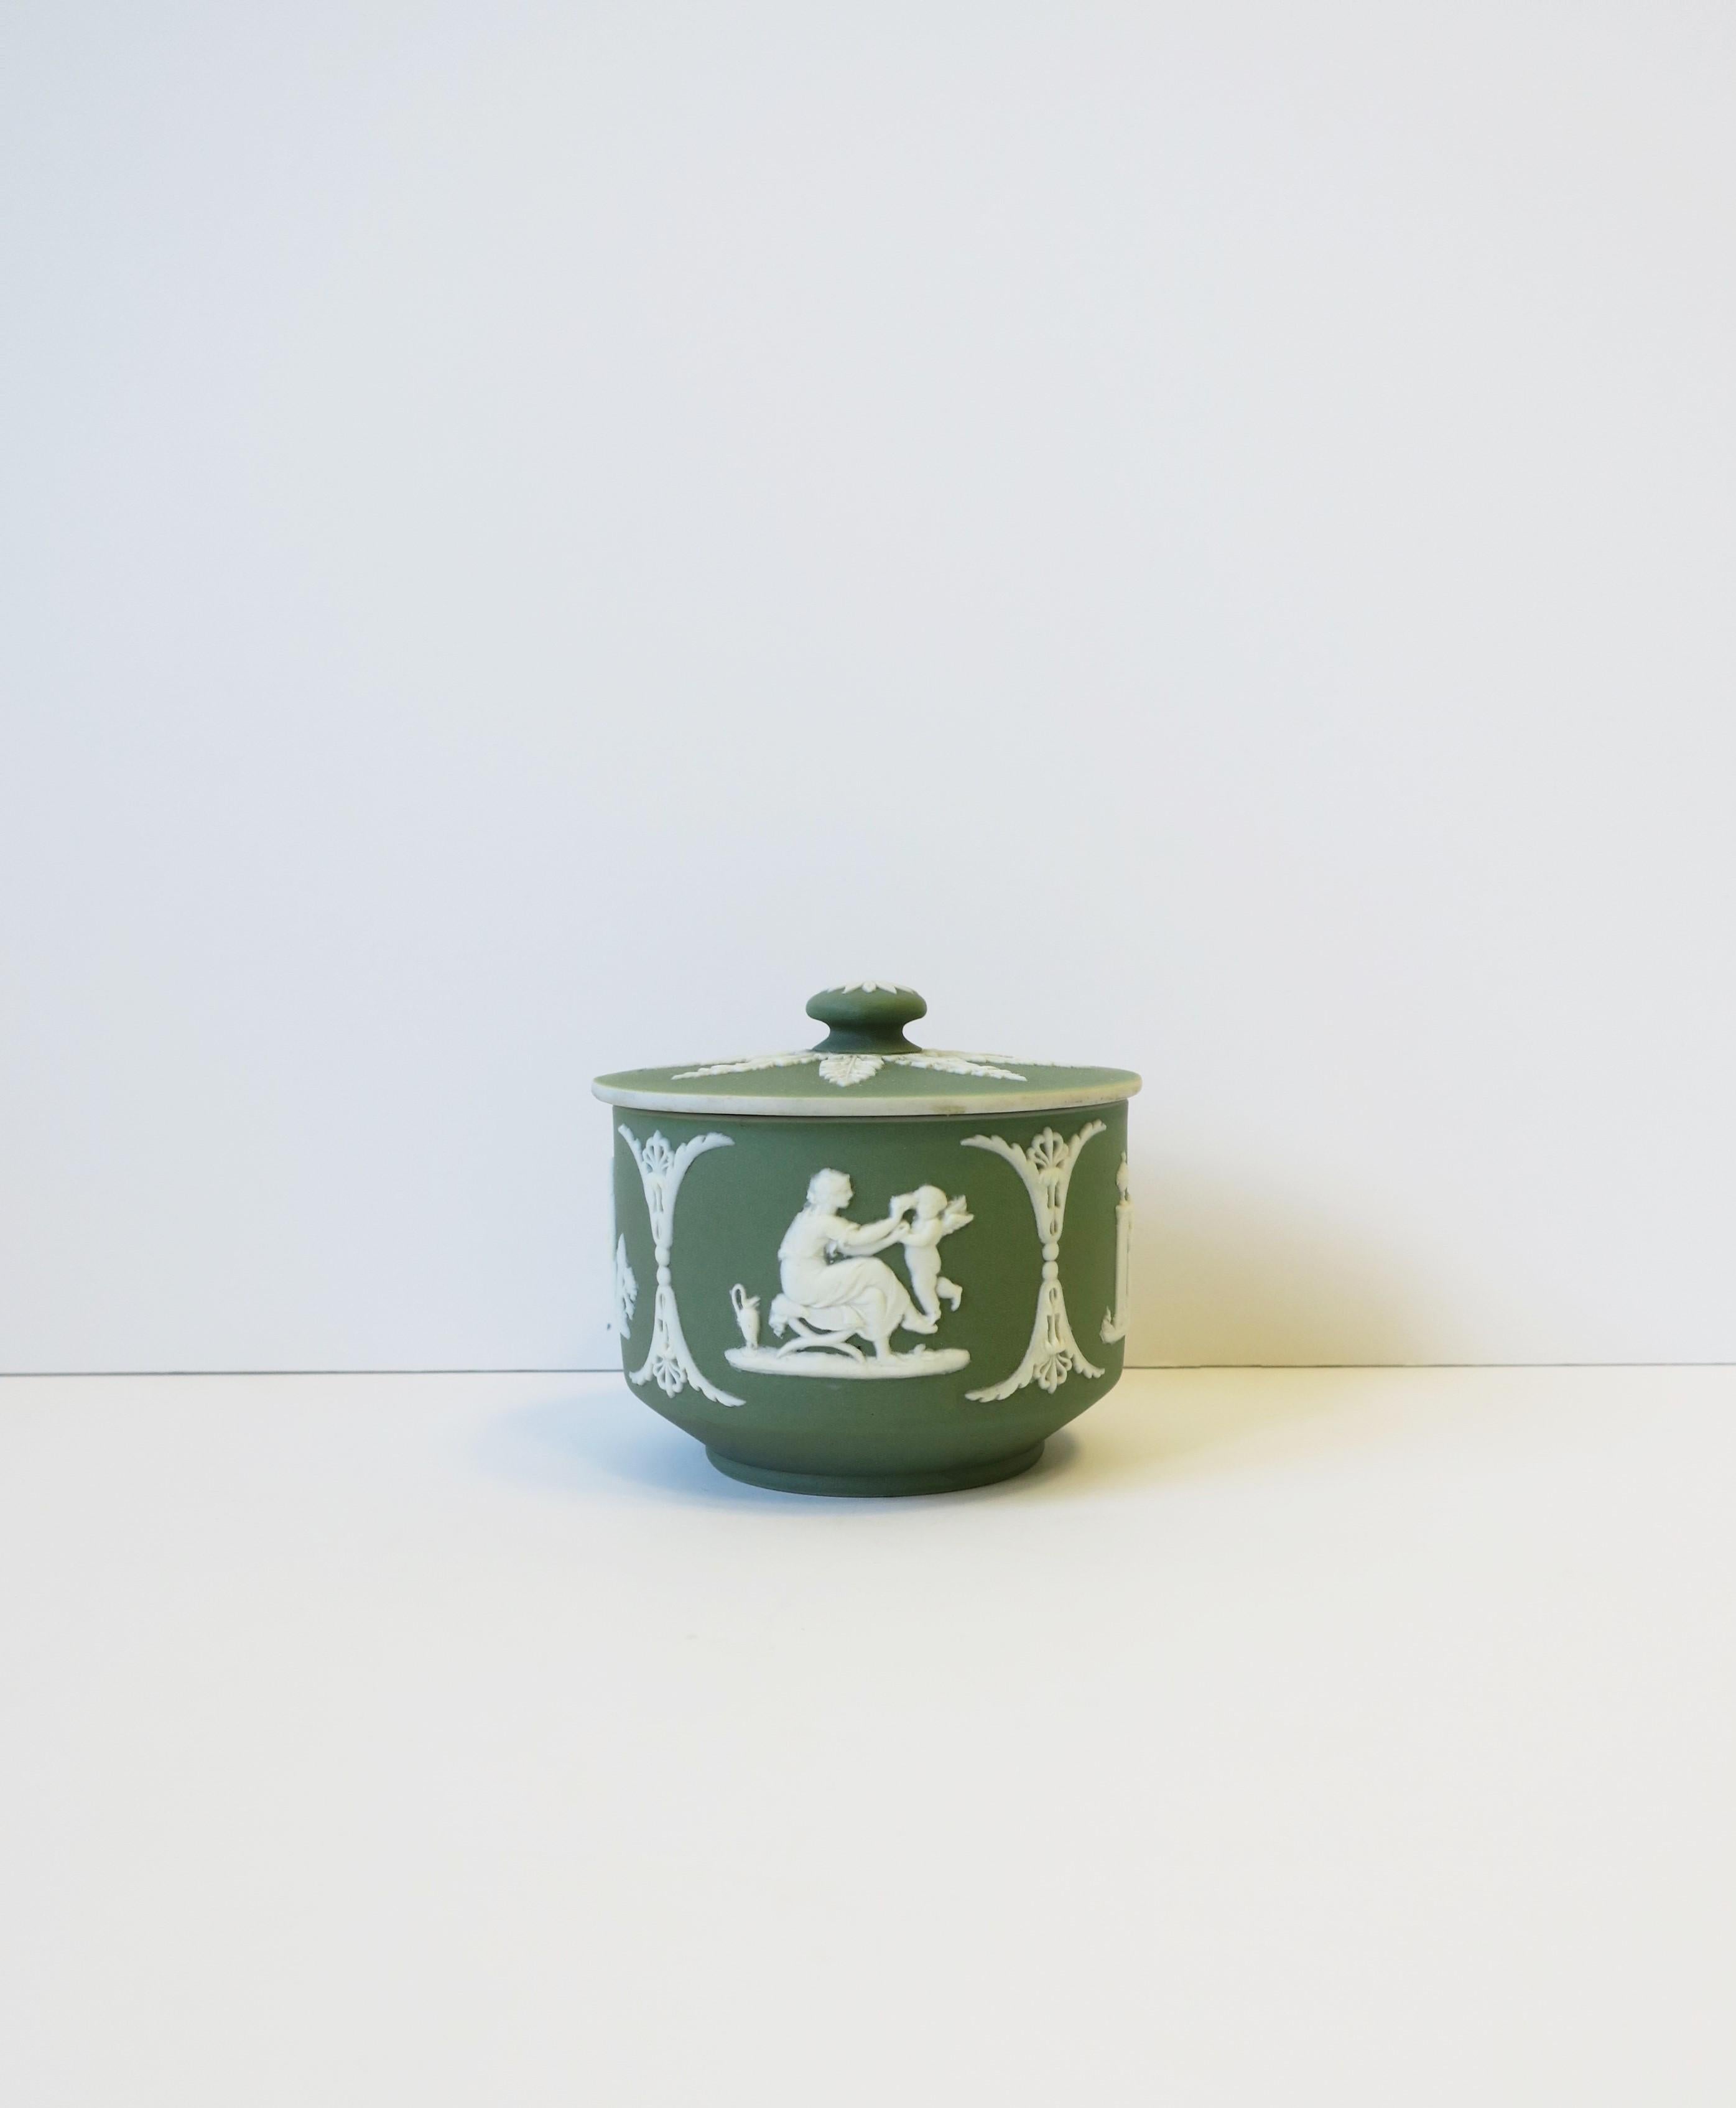 A beautiful English green and white Jasperware matte stoneware round box by Wedgwood in the Neoclassical style, circa late-19th century, England. Lid features with knot top has a detailed raised relief leaf design in white. Other beautiful